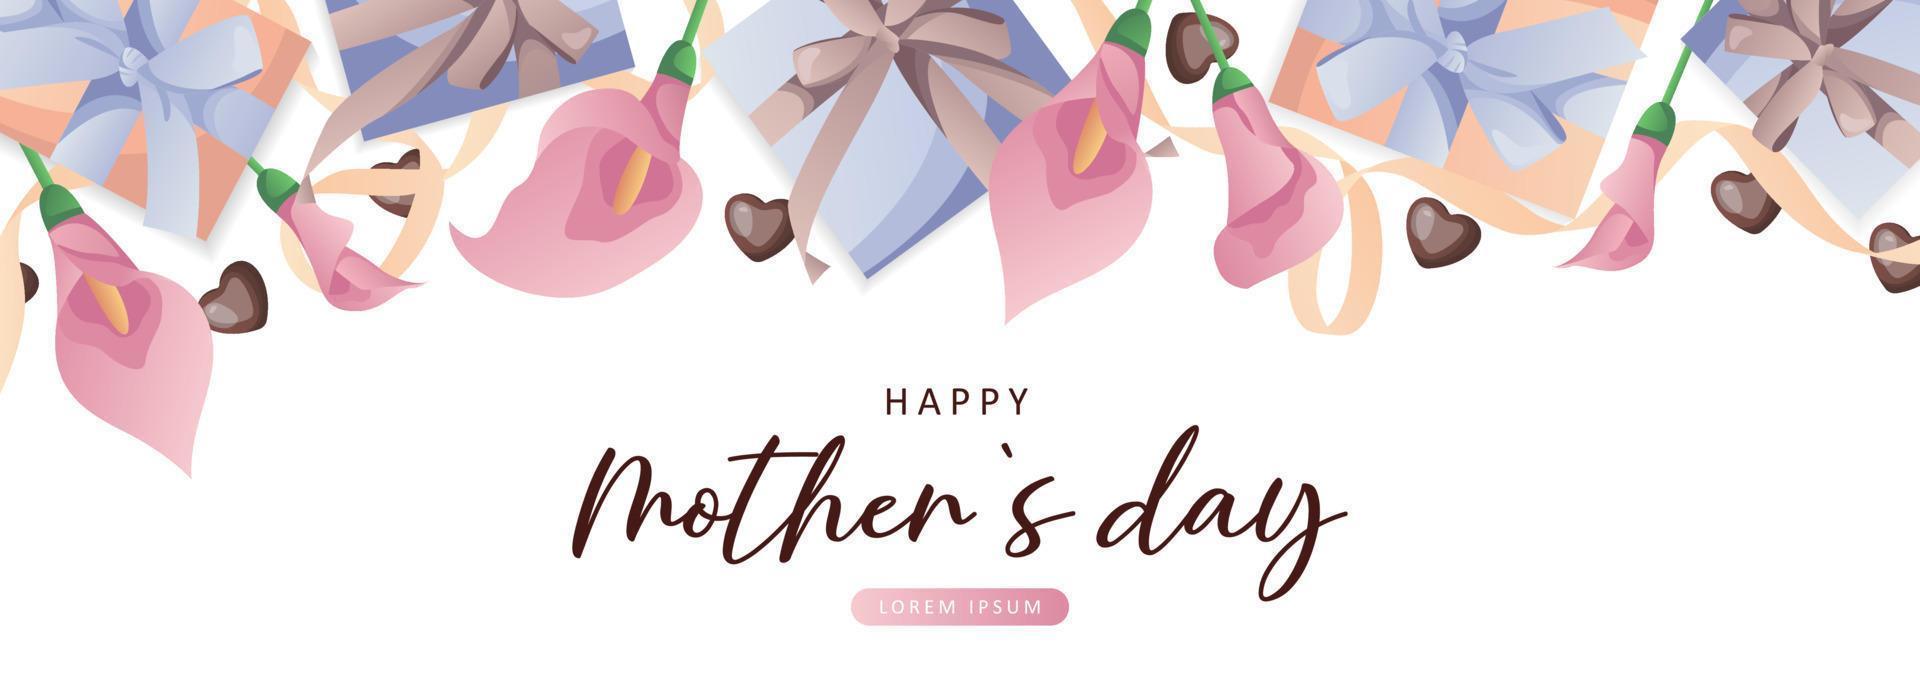 International Women's Day, 8 March banner design with number eight, pink calla lilies, chocolate hearts, gifts, ribbons. Romantic floral Mother's Day design for greeting card, poster, postcard, flyer. vector